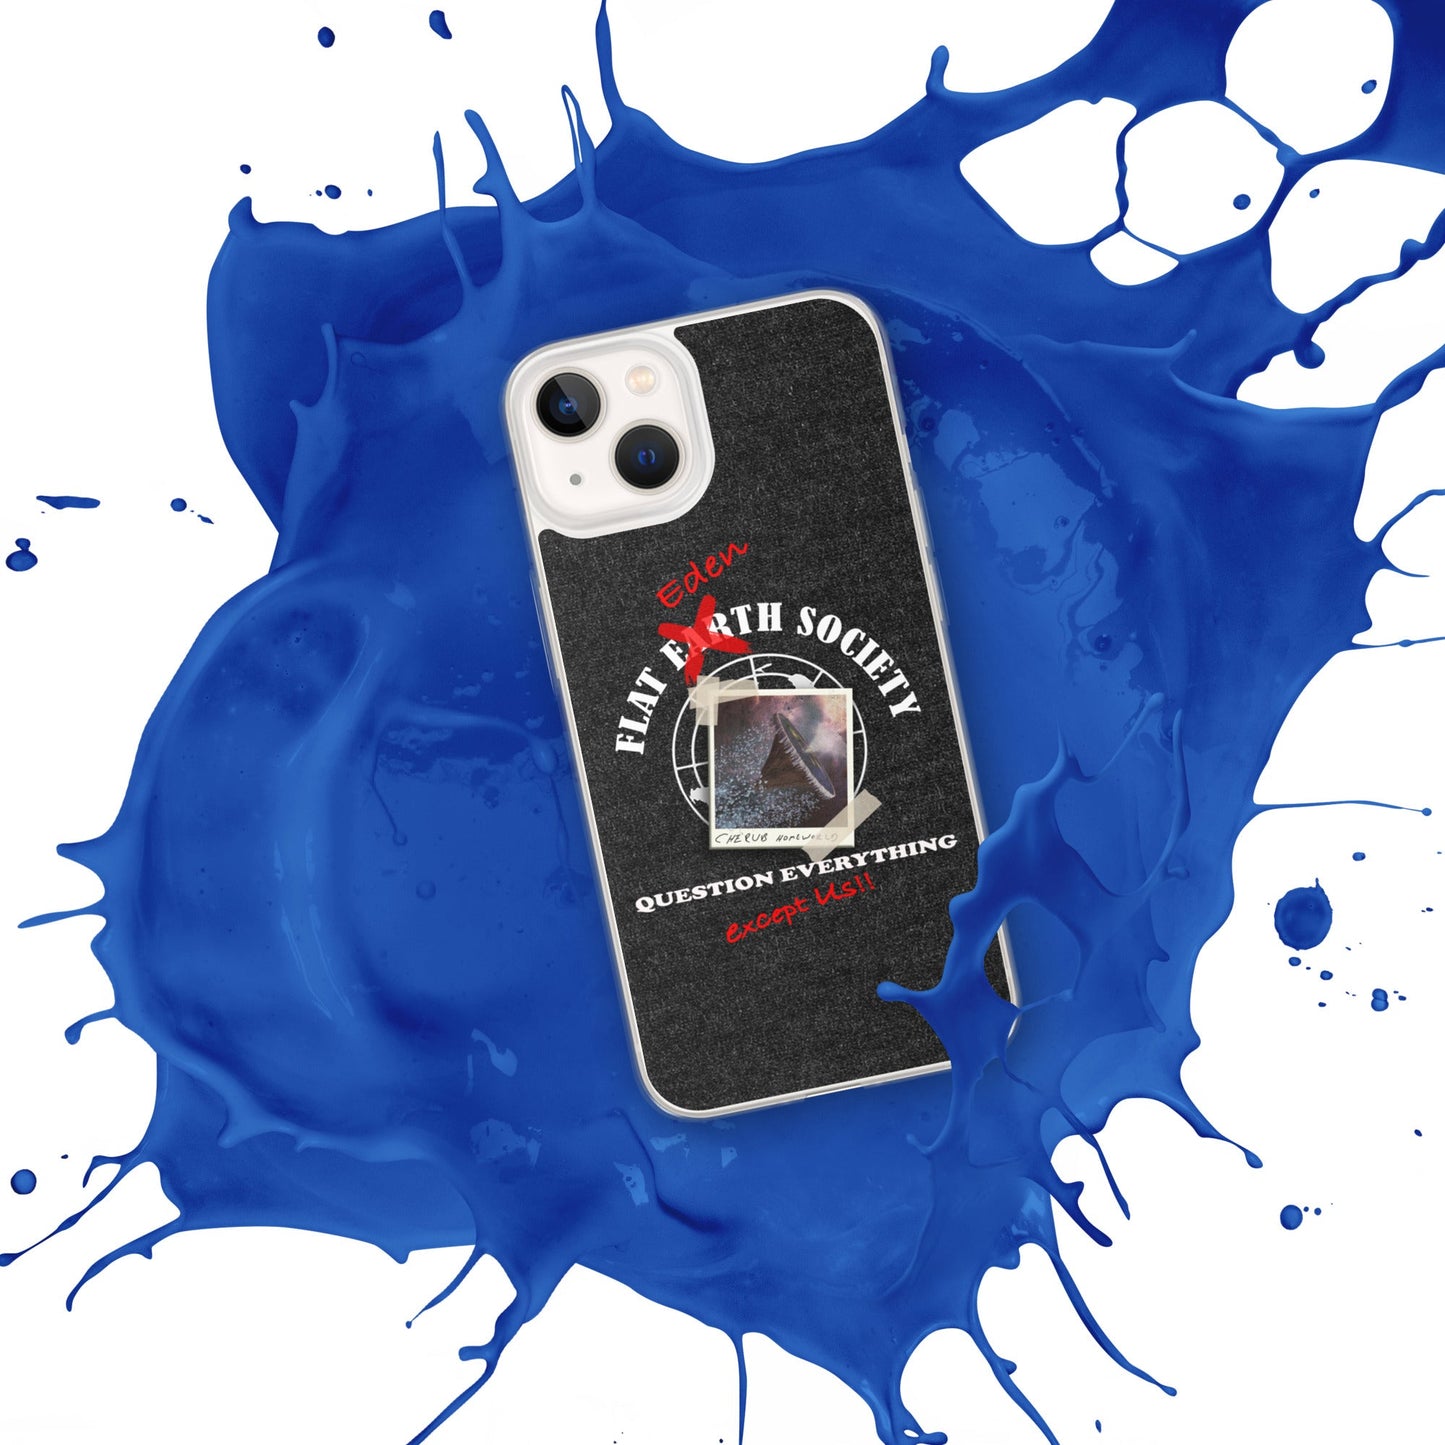 iPhone Case | Intergalactic Space Force 2 | Flat Eden Society - Spectral Ink Shop - Mobile Phone Cases -9780728_13800